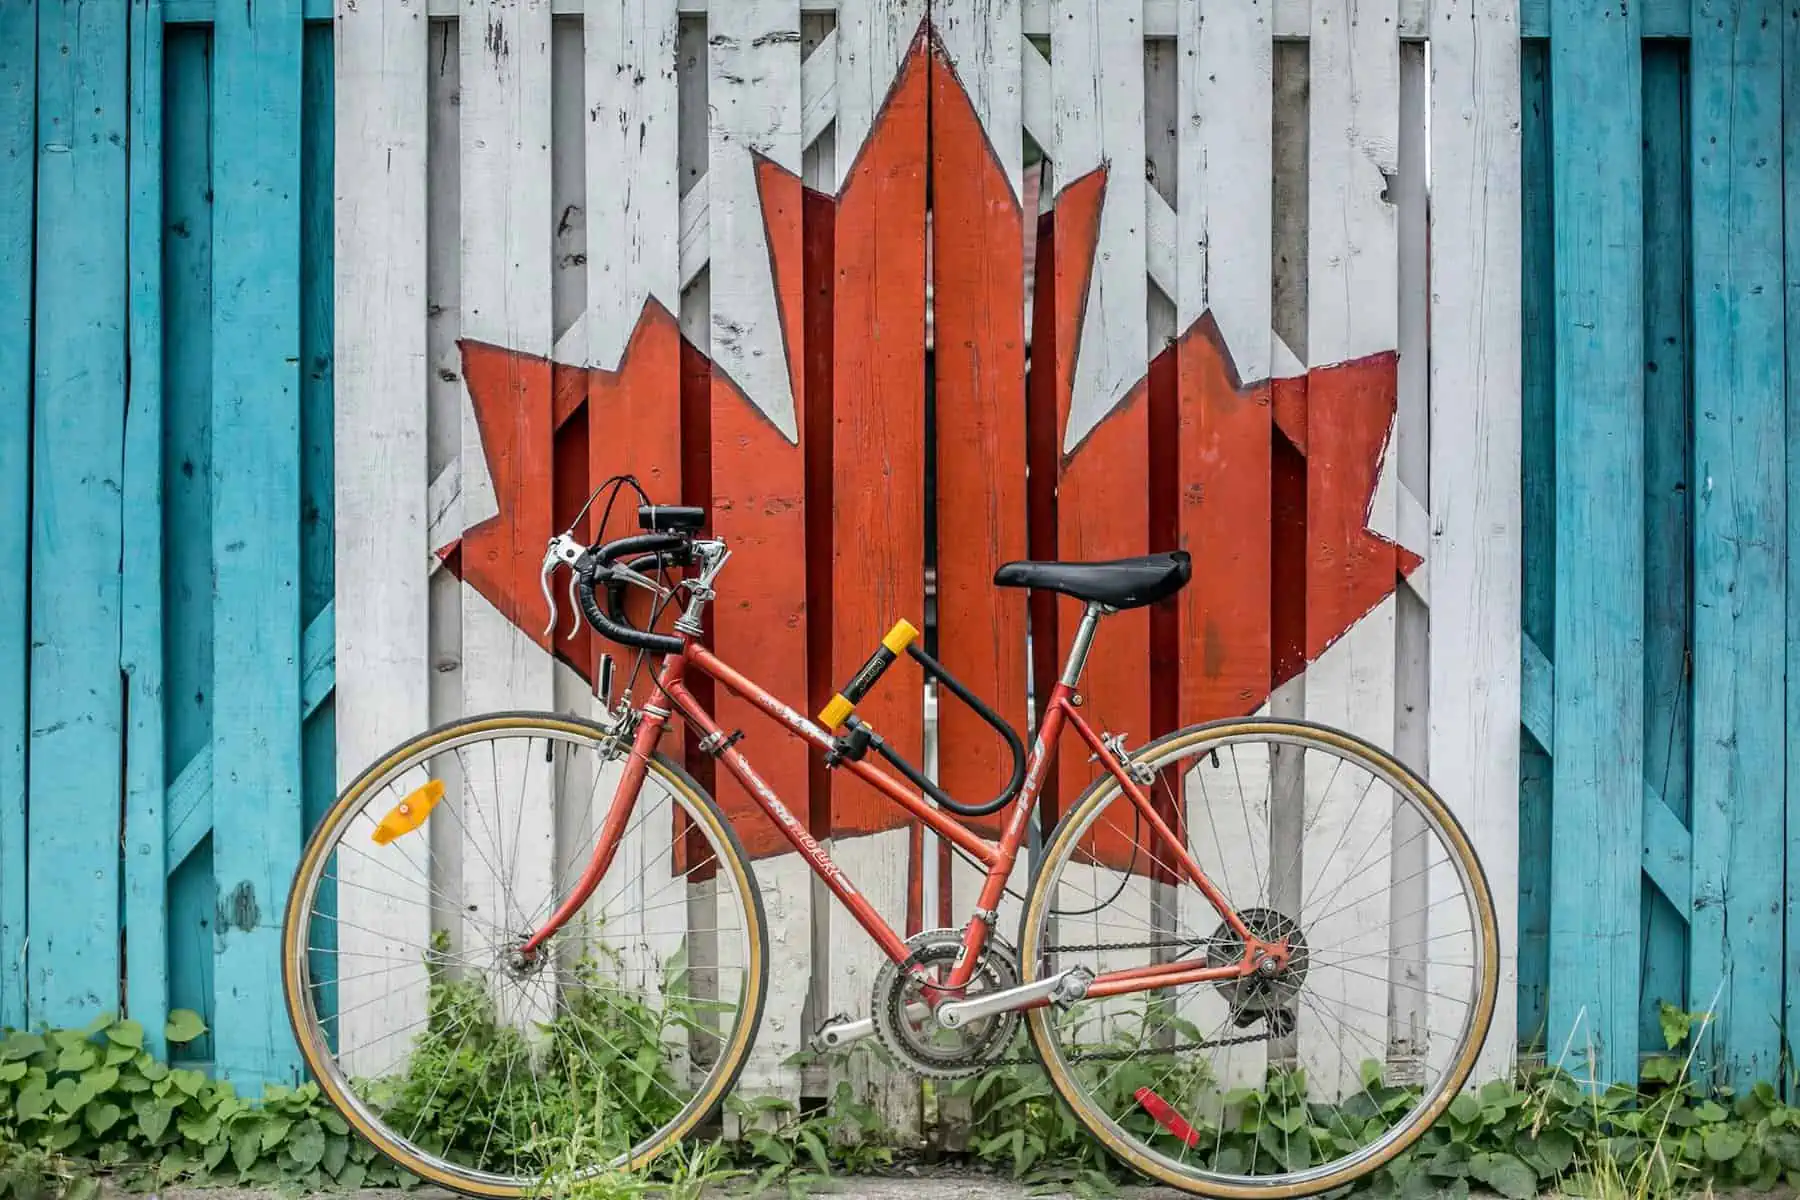 A red bike in front of a fence painted with the Canadian flag, Canada road trip